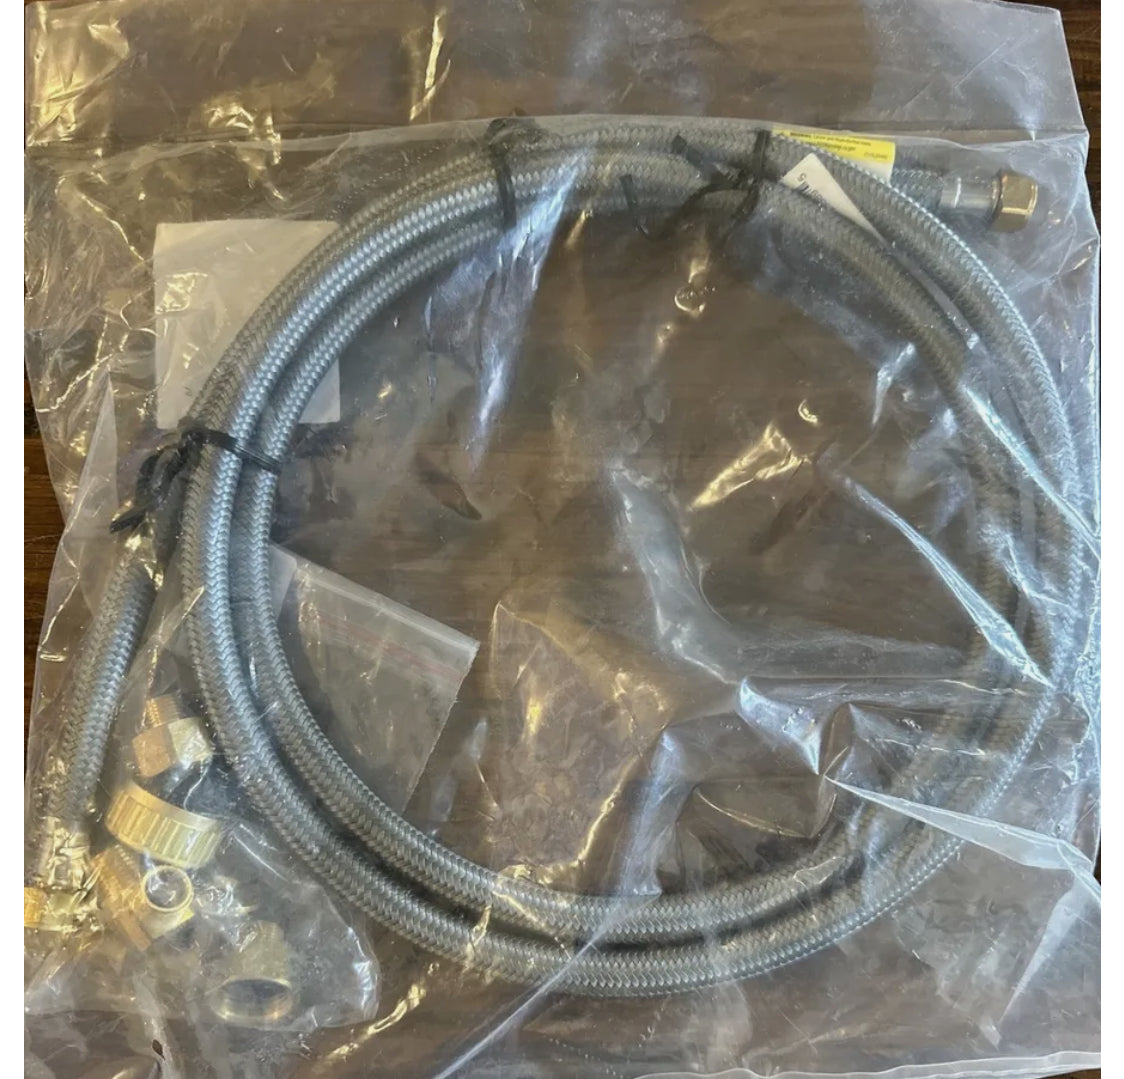 6 Ft Braided Dishwasher Connector Kit with Adapters WX28X326 GE Damaged Bag